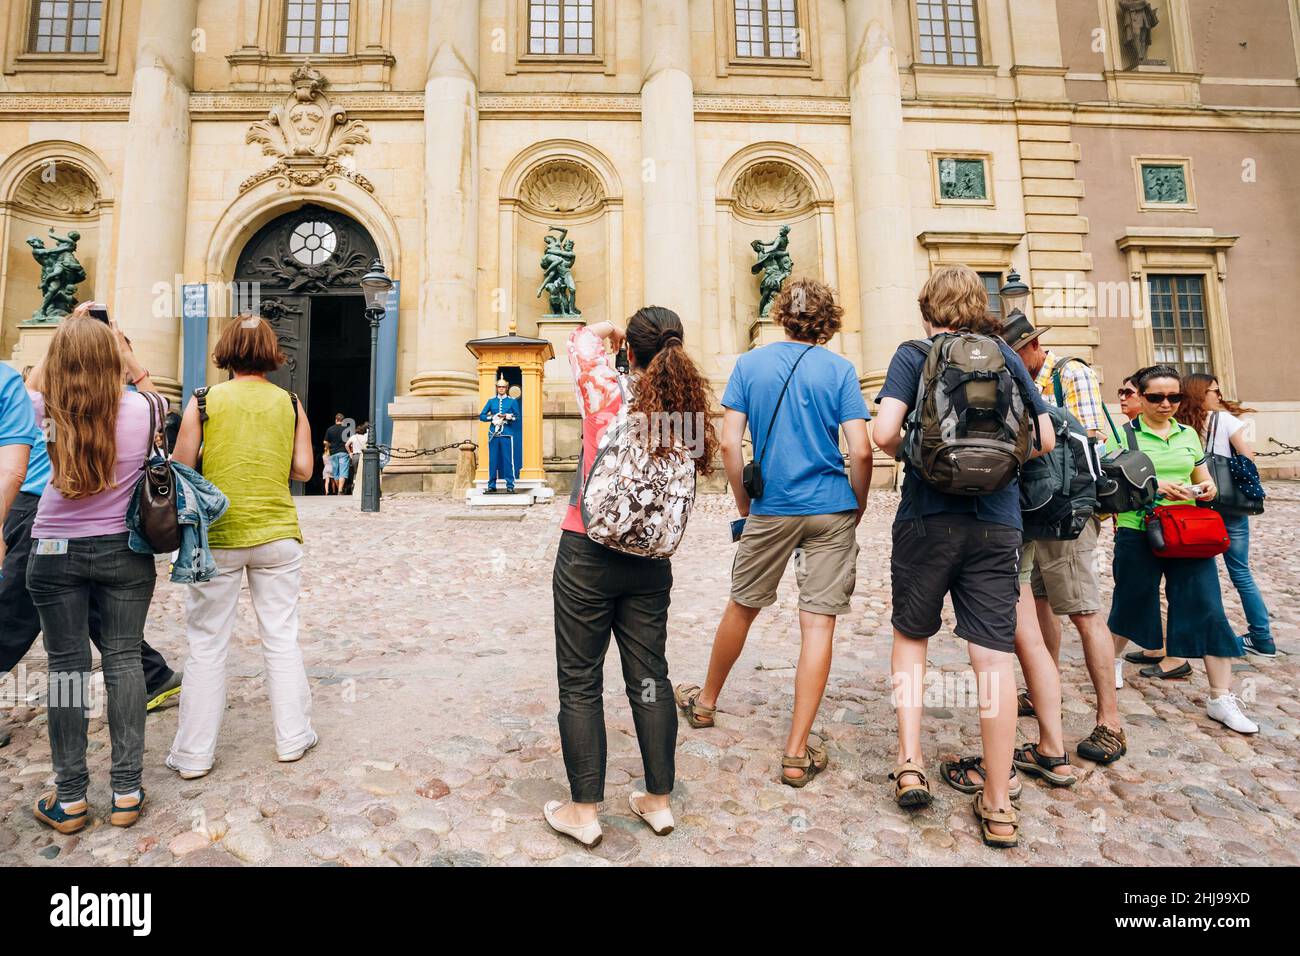 Tourists visit and photograph the guard of honor at the Royal palace in Gamla Stan, where king Carl XVI Gustaf has his working office. Stock Photo